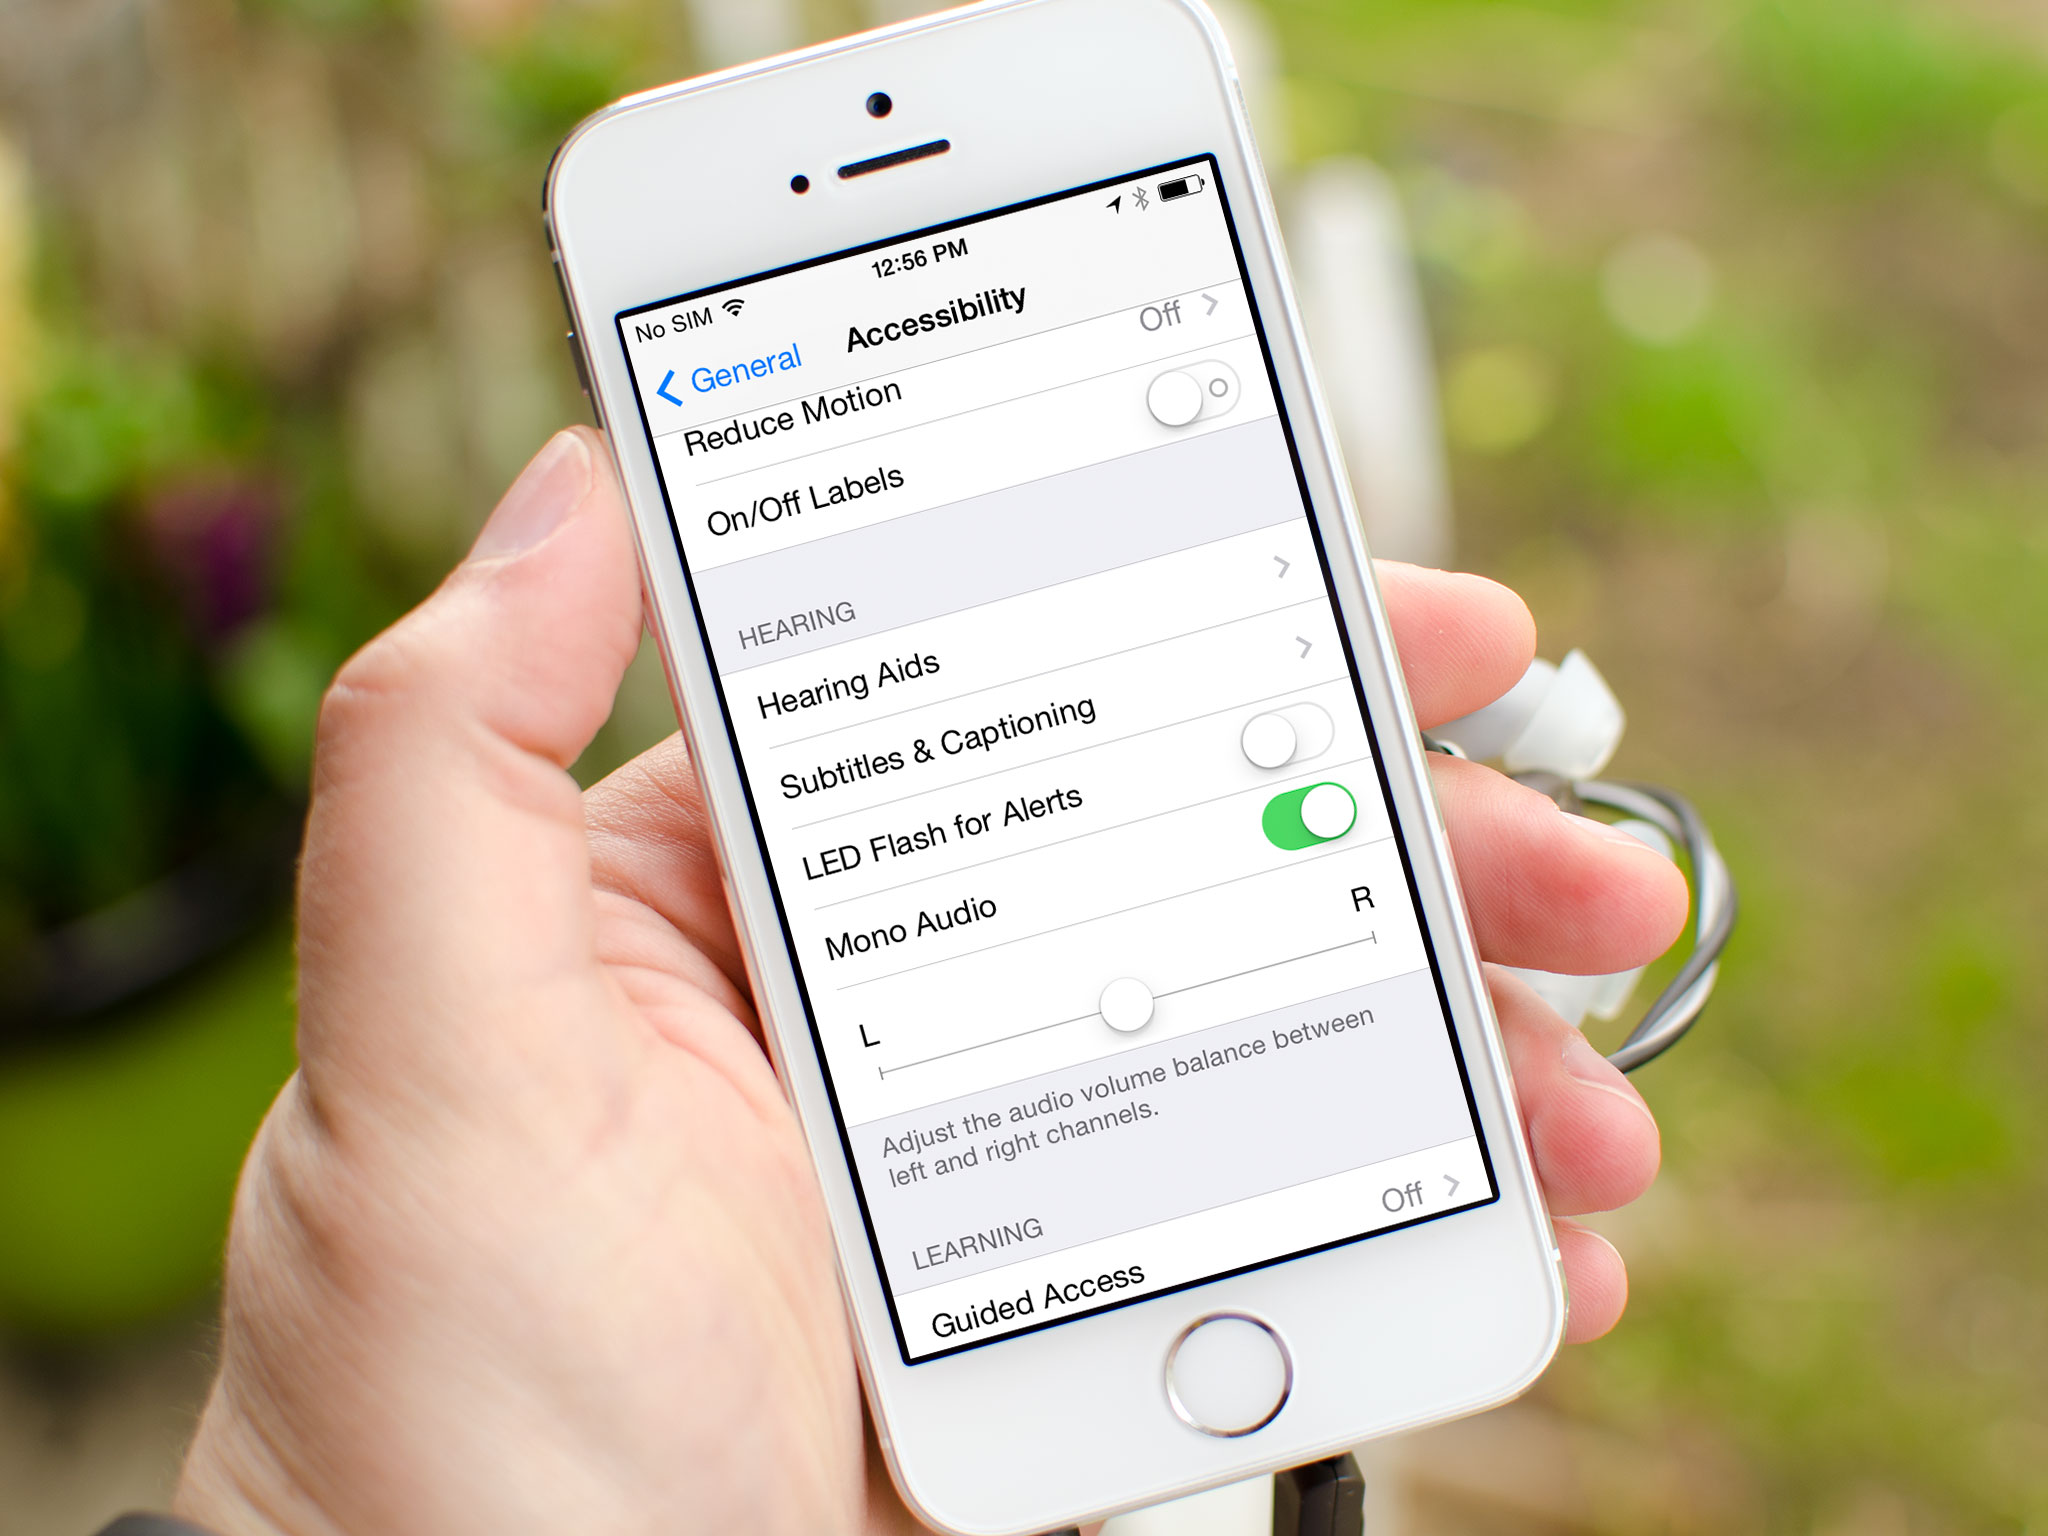 How to enable mono audio for auditory accessibility on iPhone or iPad